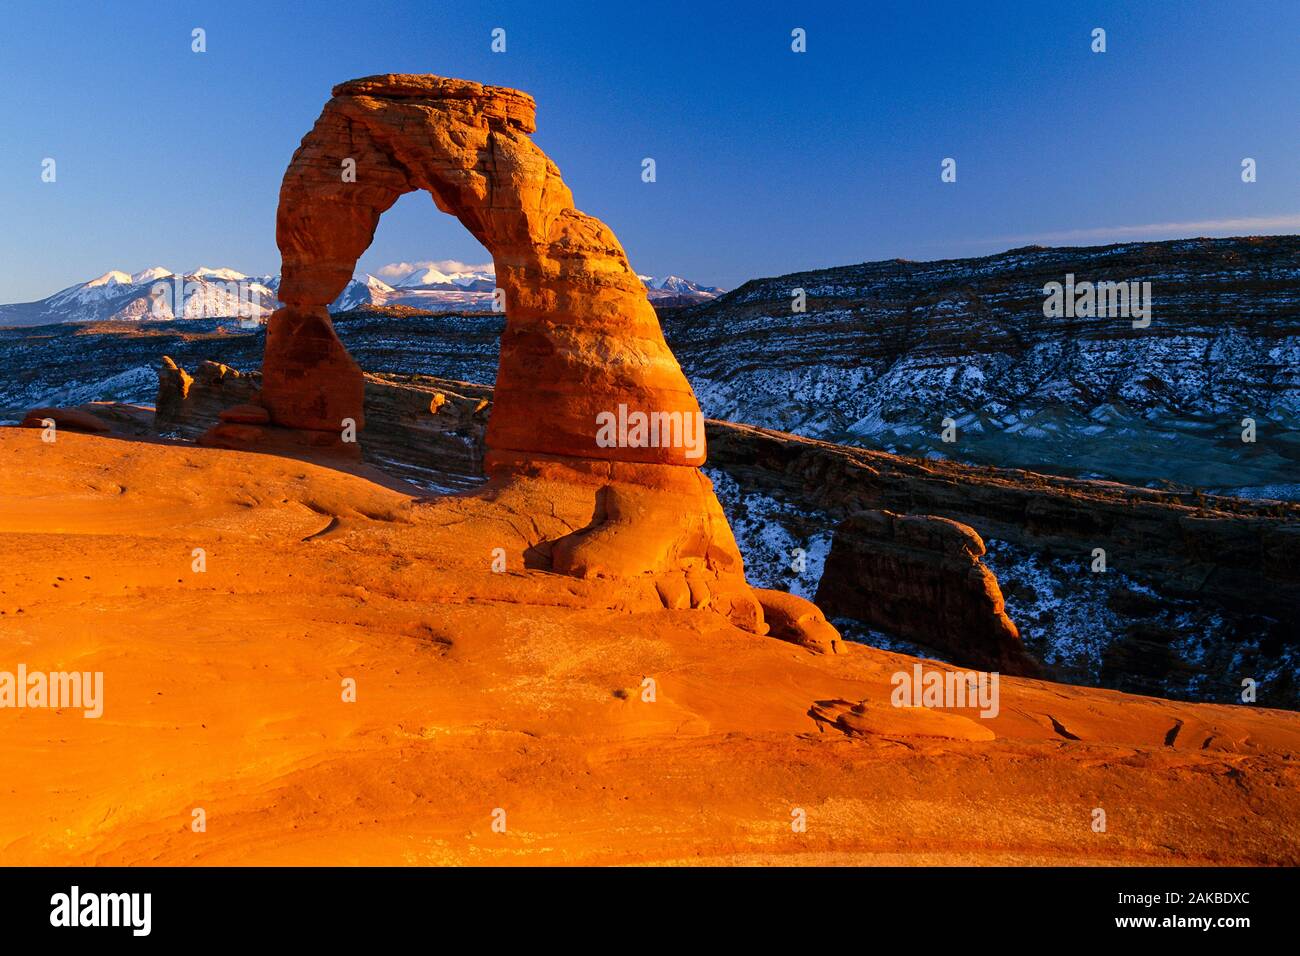 Landscape with natural sandstone arch in desert, Delicate Arch, Arches National Park, Utah, USA Stock Photo